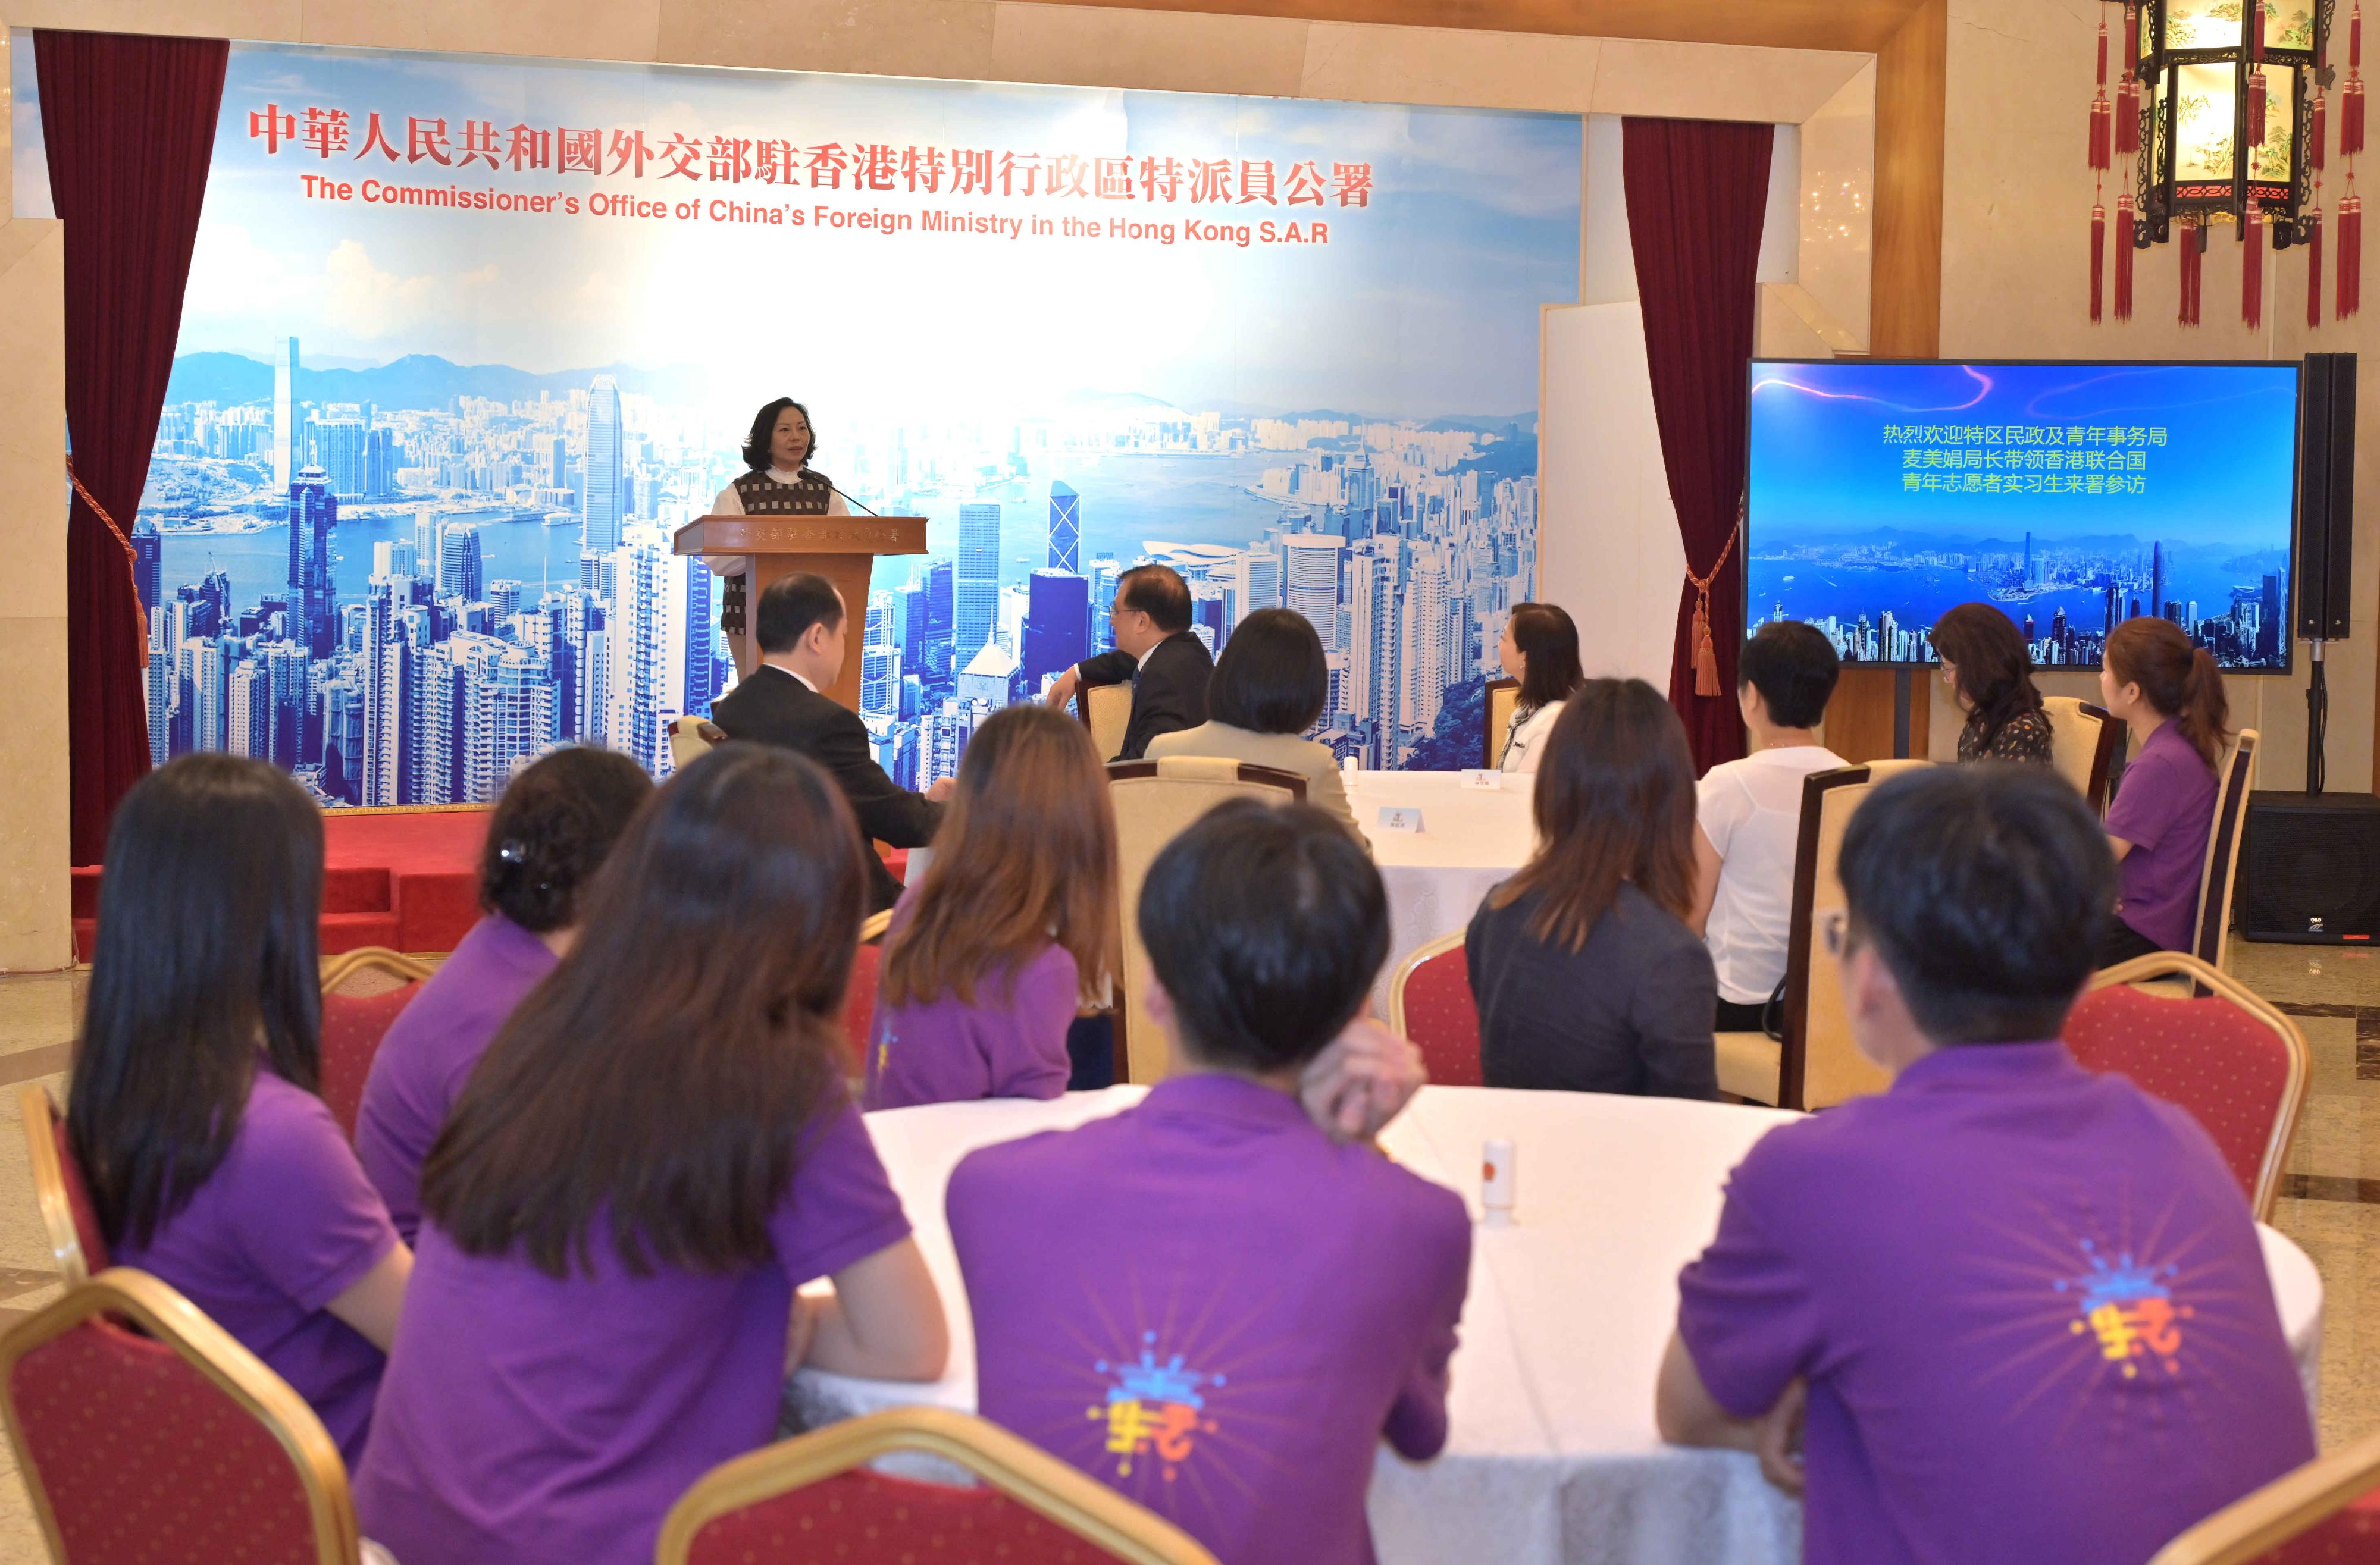 The Secretary for Home and Youth Affairs, Miss Alice Mak, led a group of youth volunteer interns under the United Nations Volunteers - Hong Kong Universities Volunteer Internship Programme to visit the Office of the Commissioner of the Ministry of Foreign Affairs in the Hong Kong Special Administrative Region today (June 27). Photo shows Miss Mak delivering a speech during the visit.